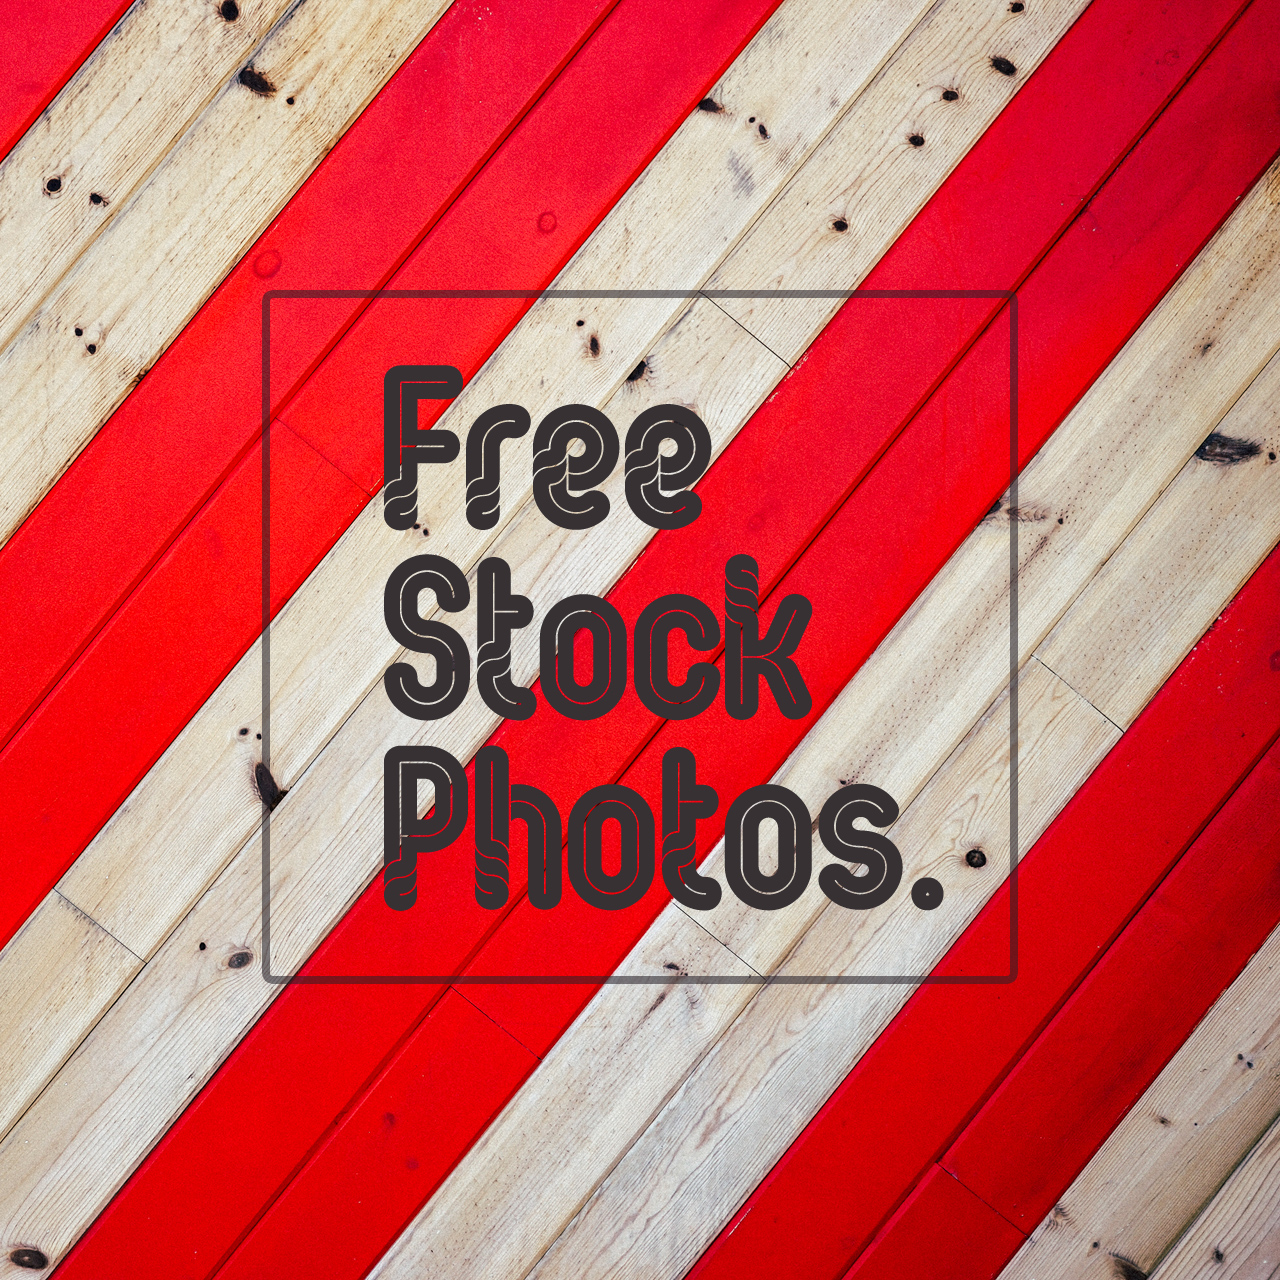 21 Best Free Stock Photo Sites on the Web ...